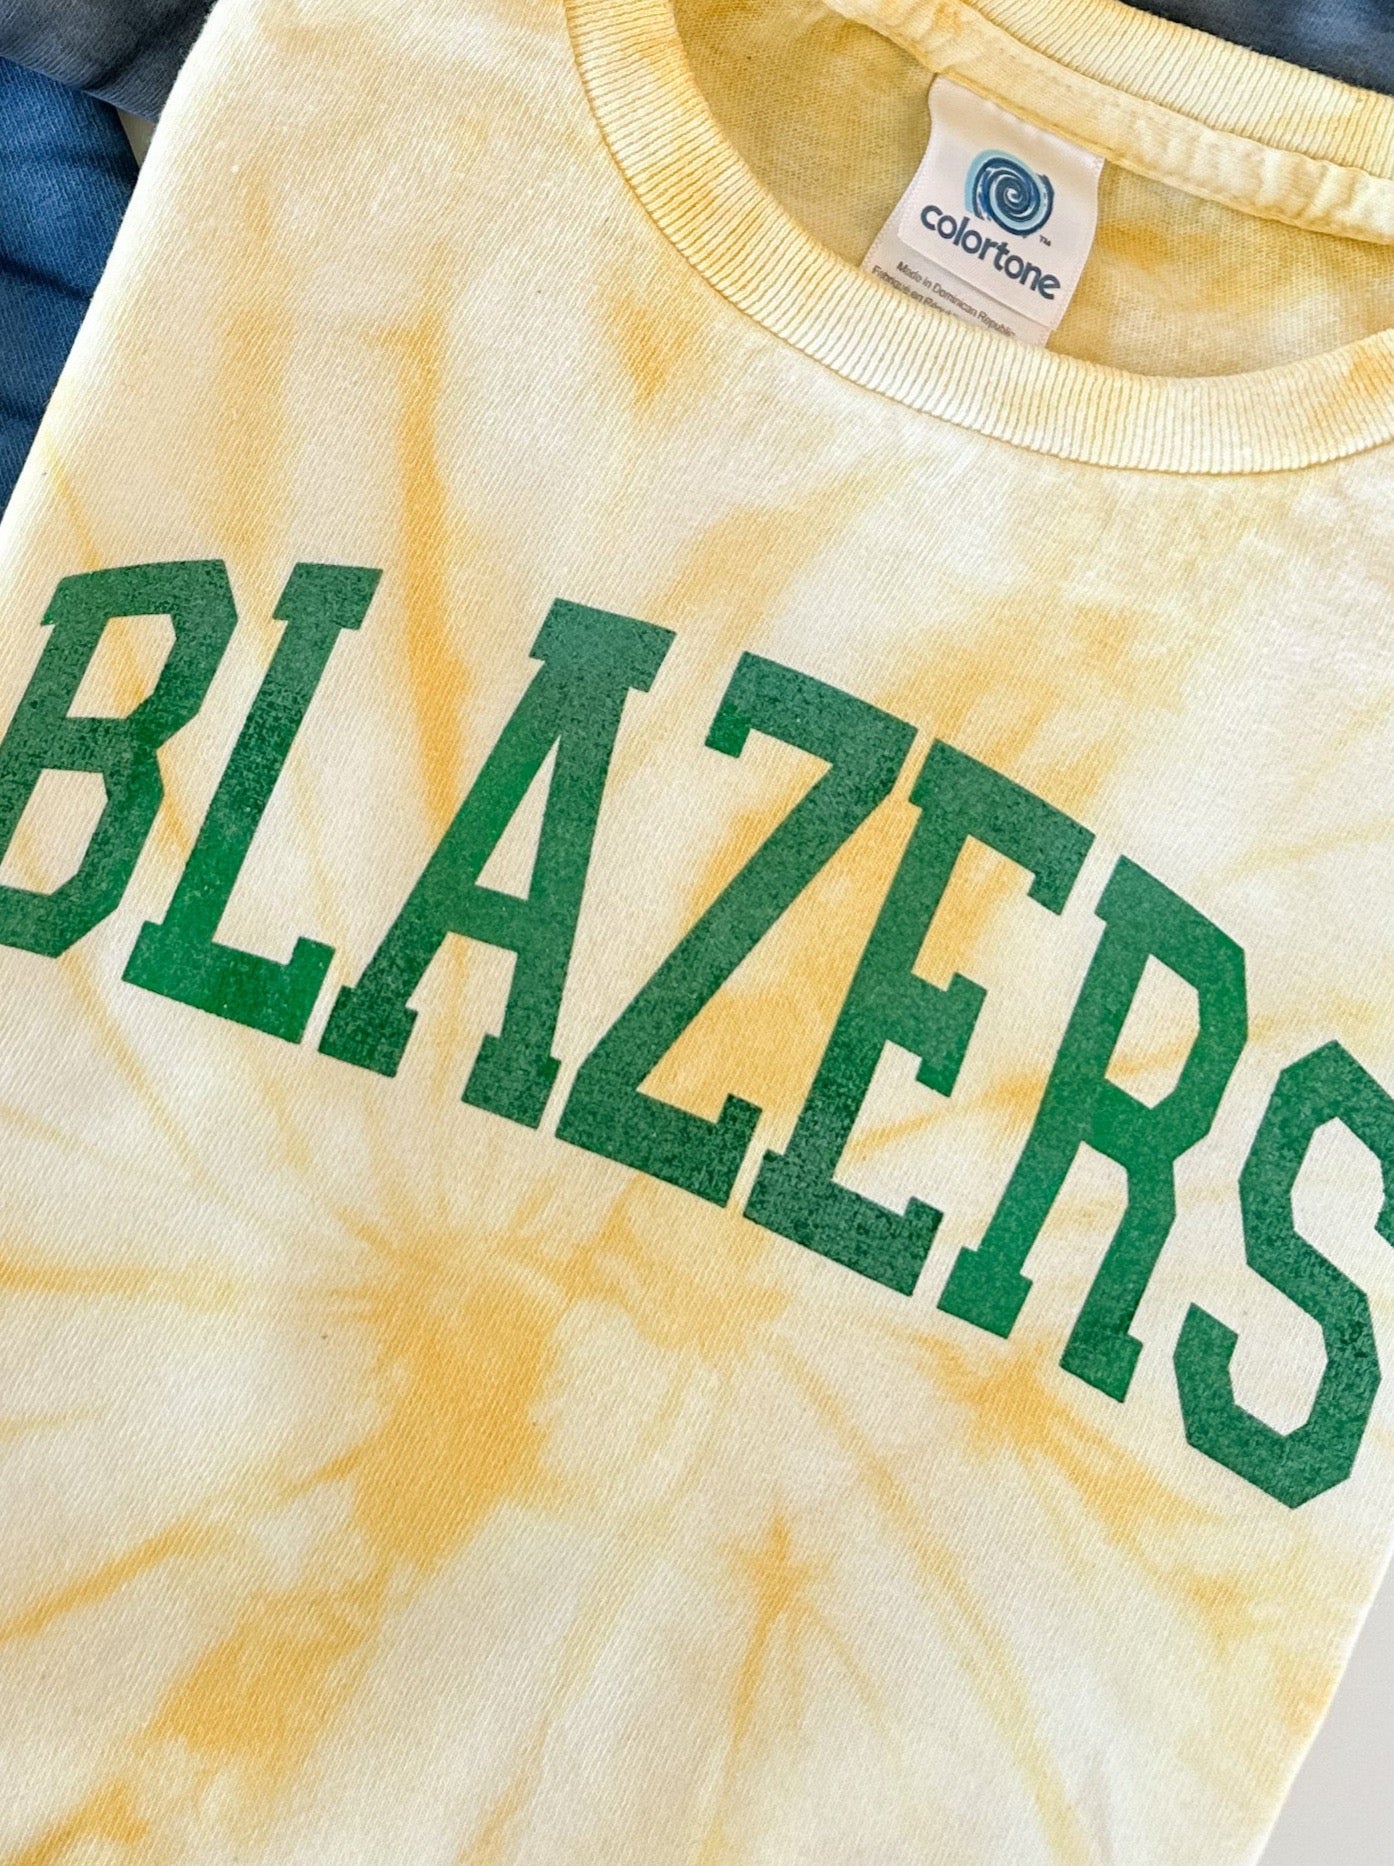 Blazers Foil | Kids Tie Dye Tee | RTS-Sister Shirts-Sister Shirts, Cute & Custom Tees for Mama & Littles in Trussville, Alabama.